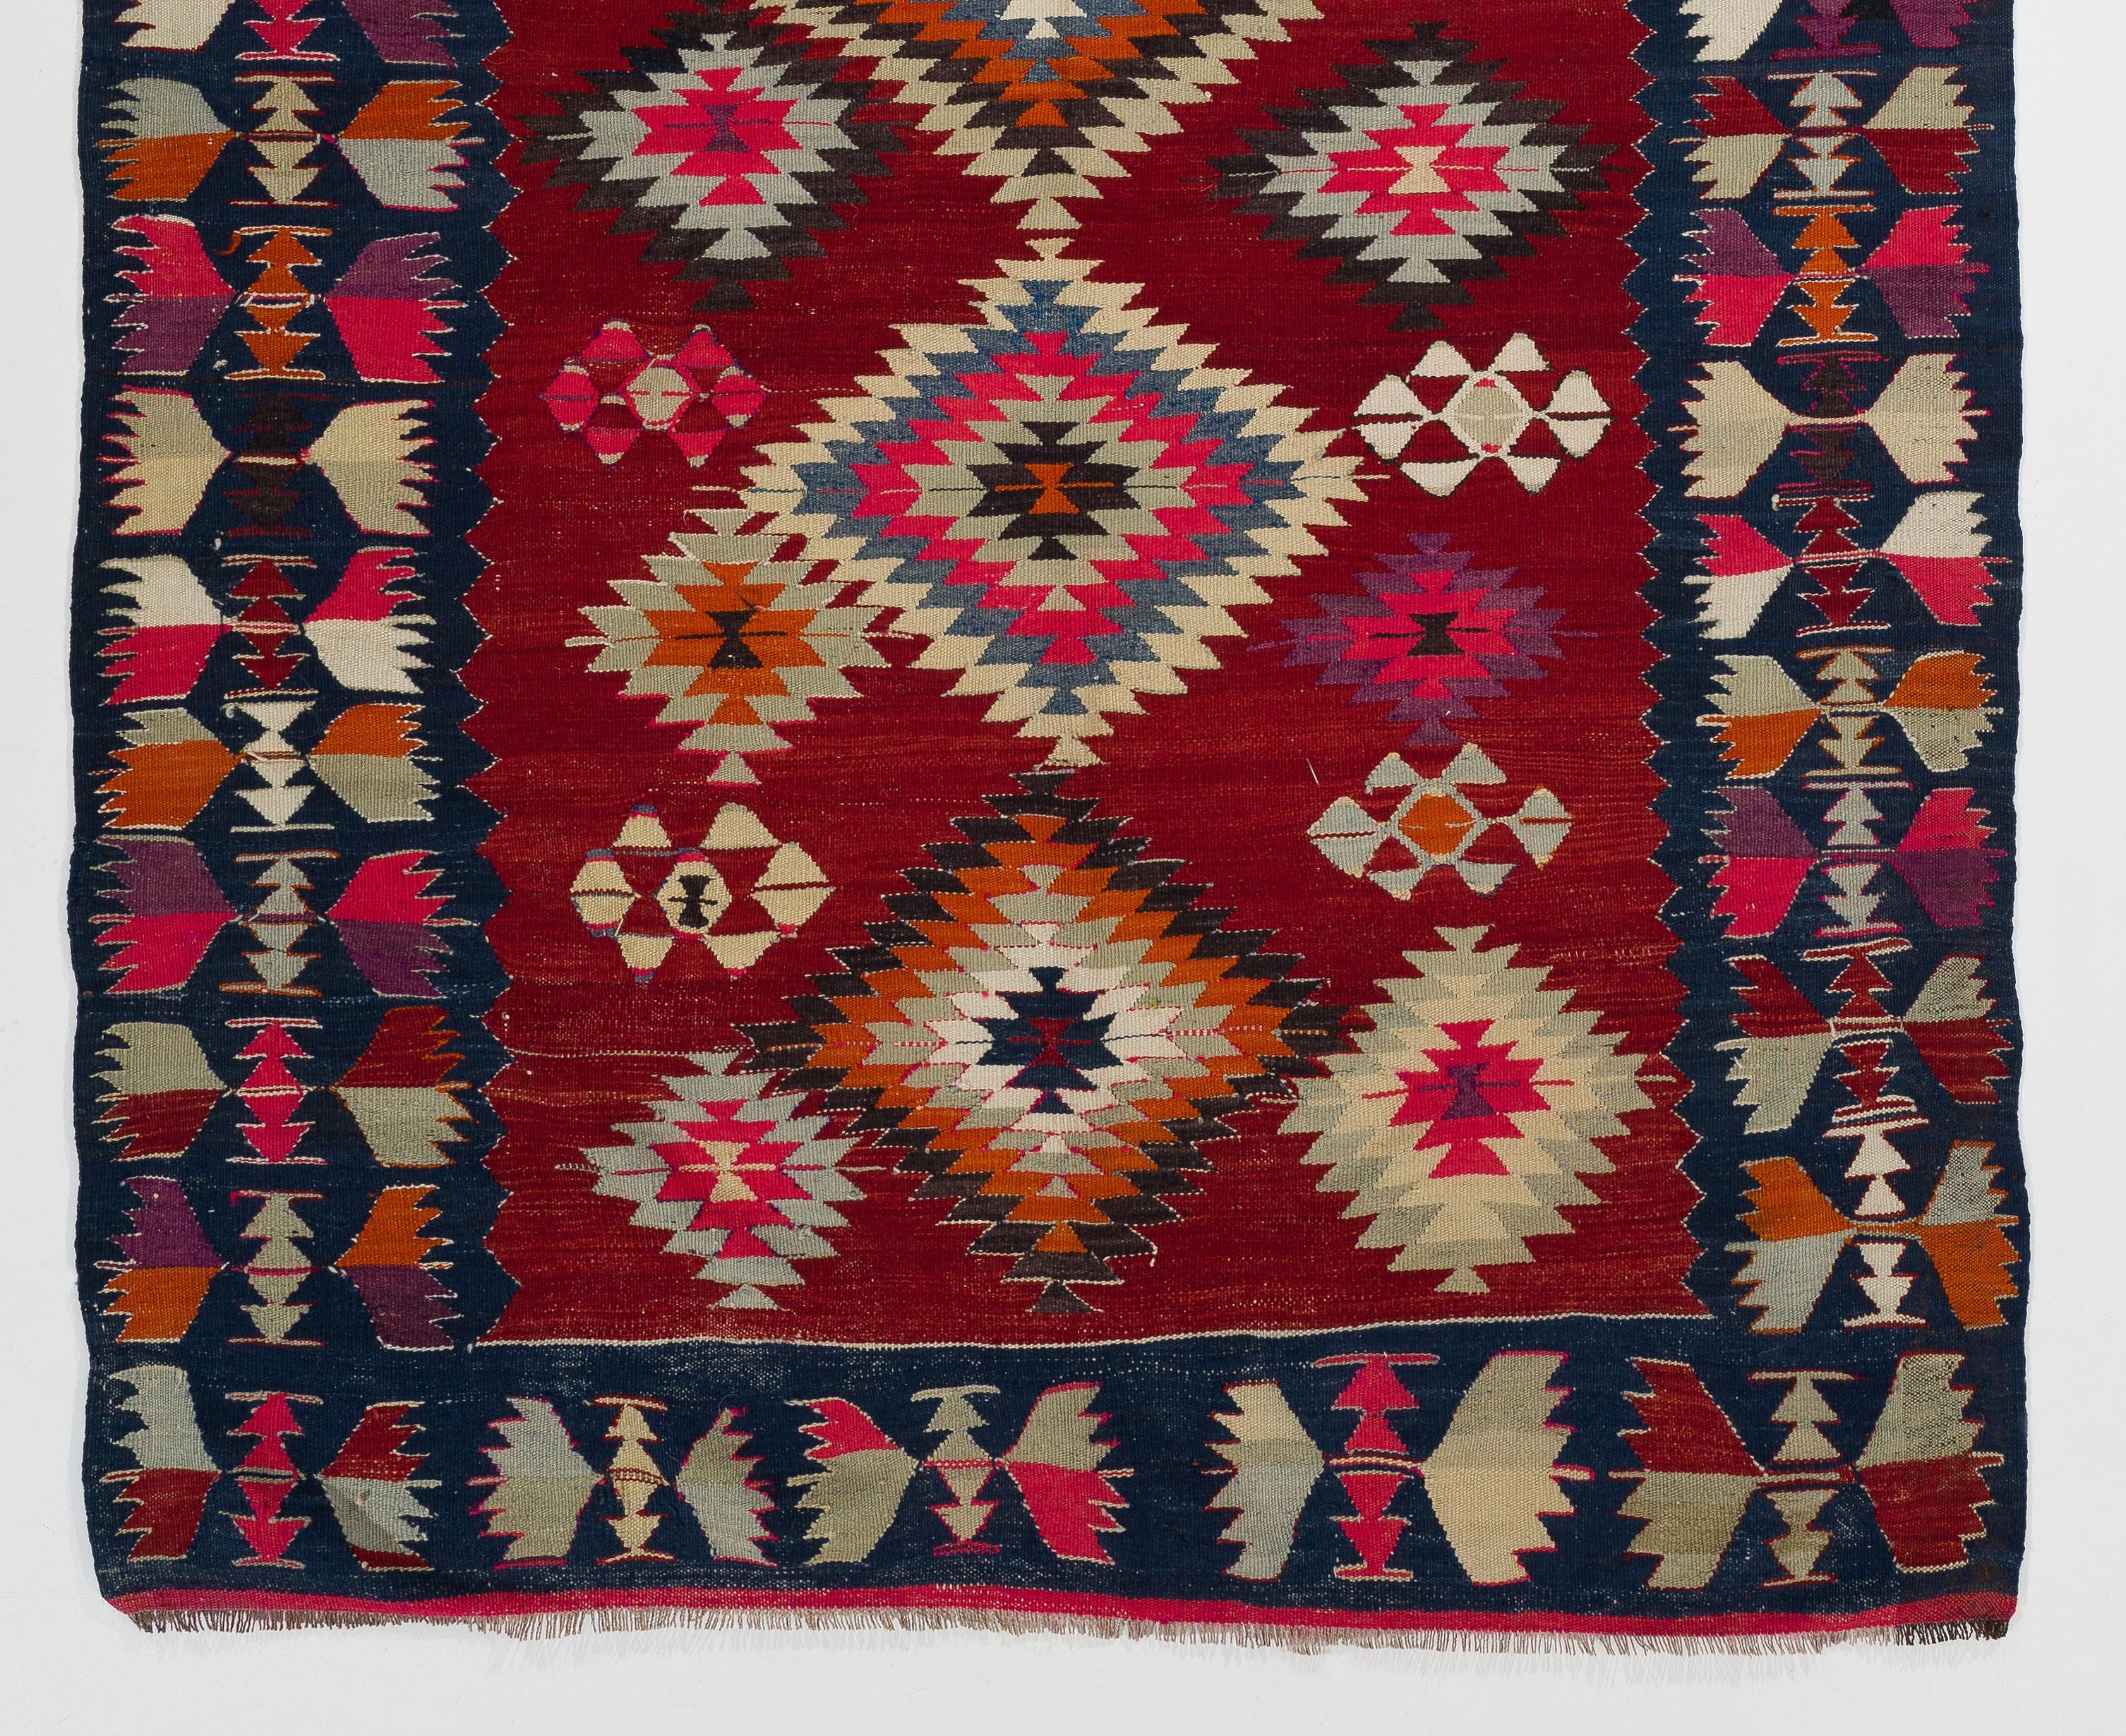 Hand-Woven 5.4x8.5 ft Hand Woven Turkish Kilim Rug with Geometric Design in Red and Indigo For Sale